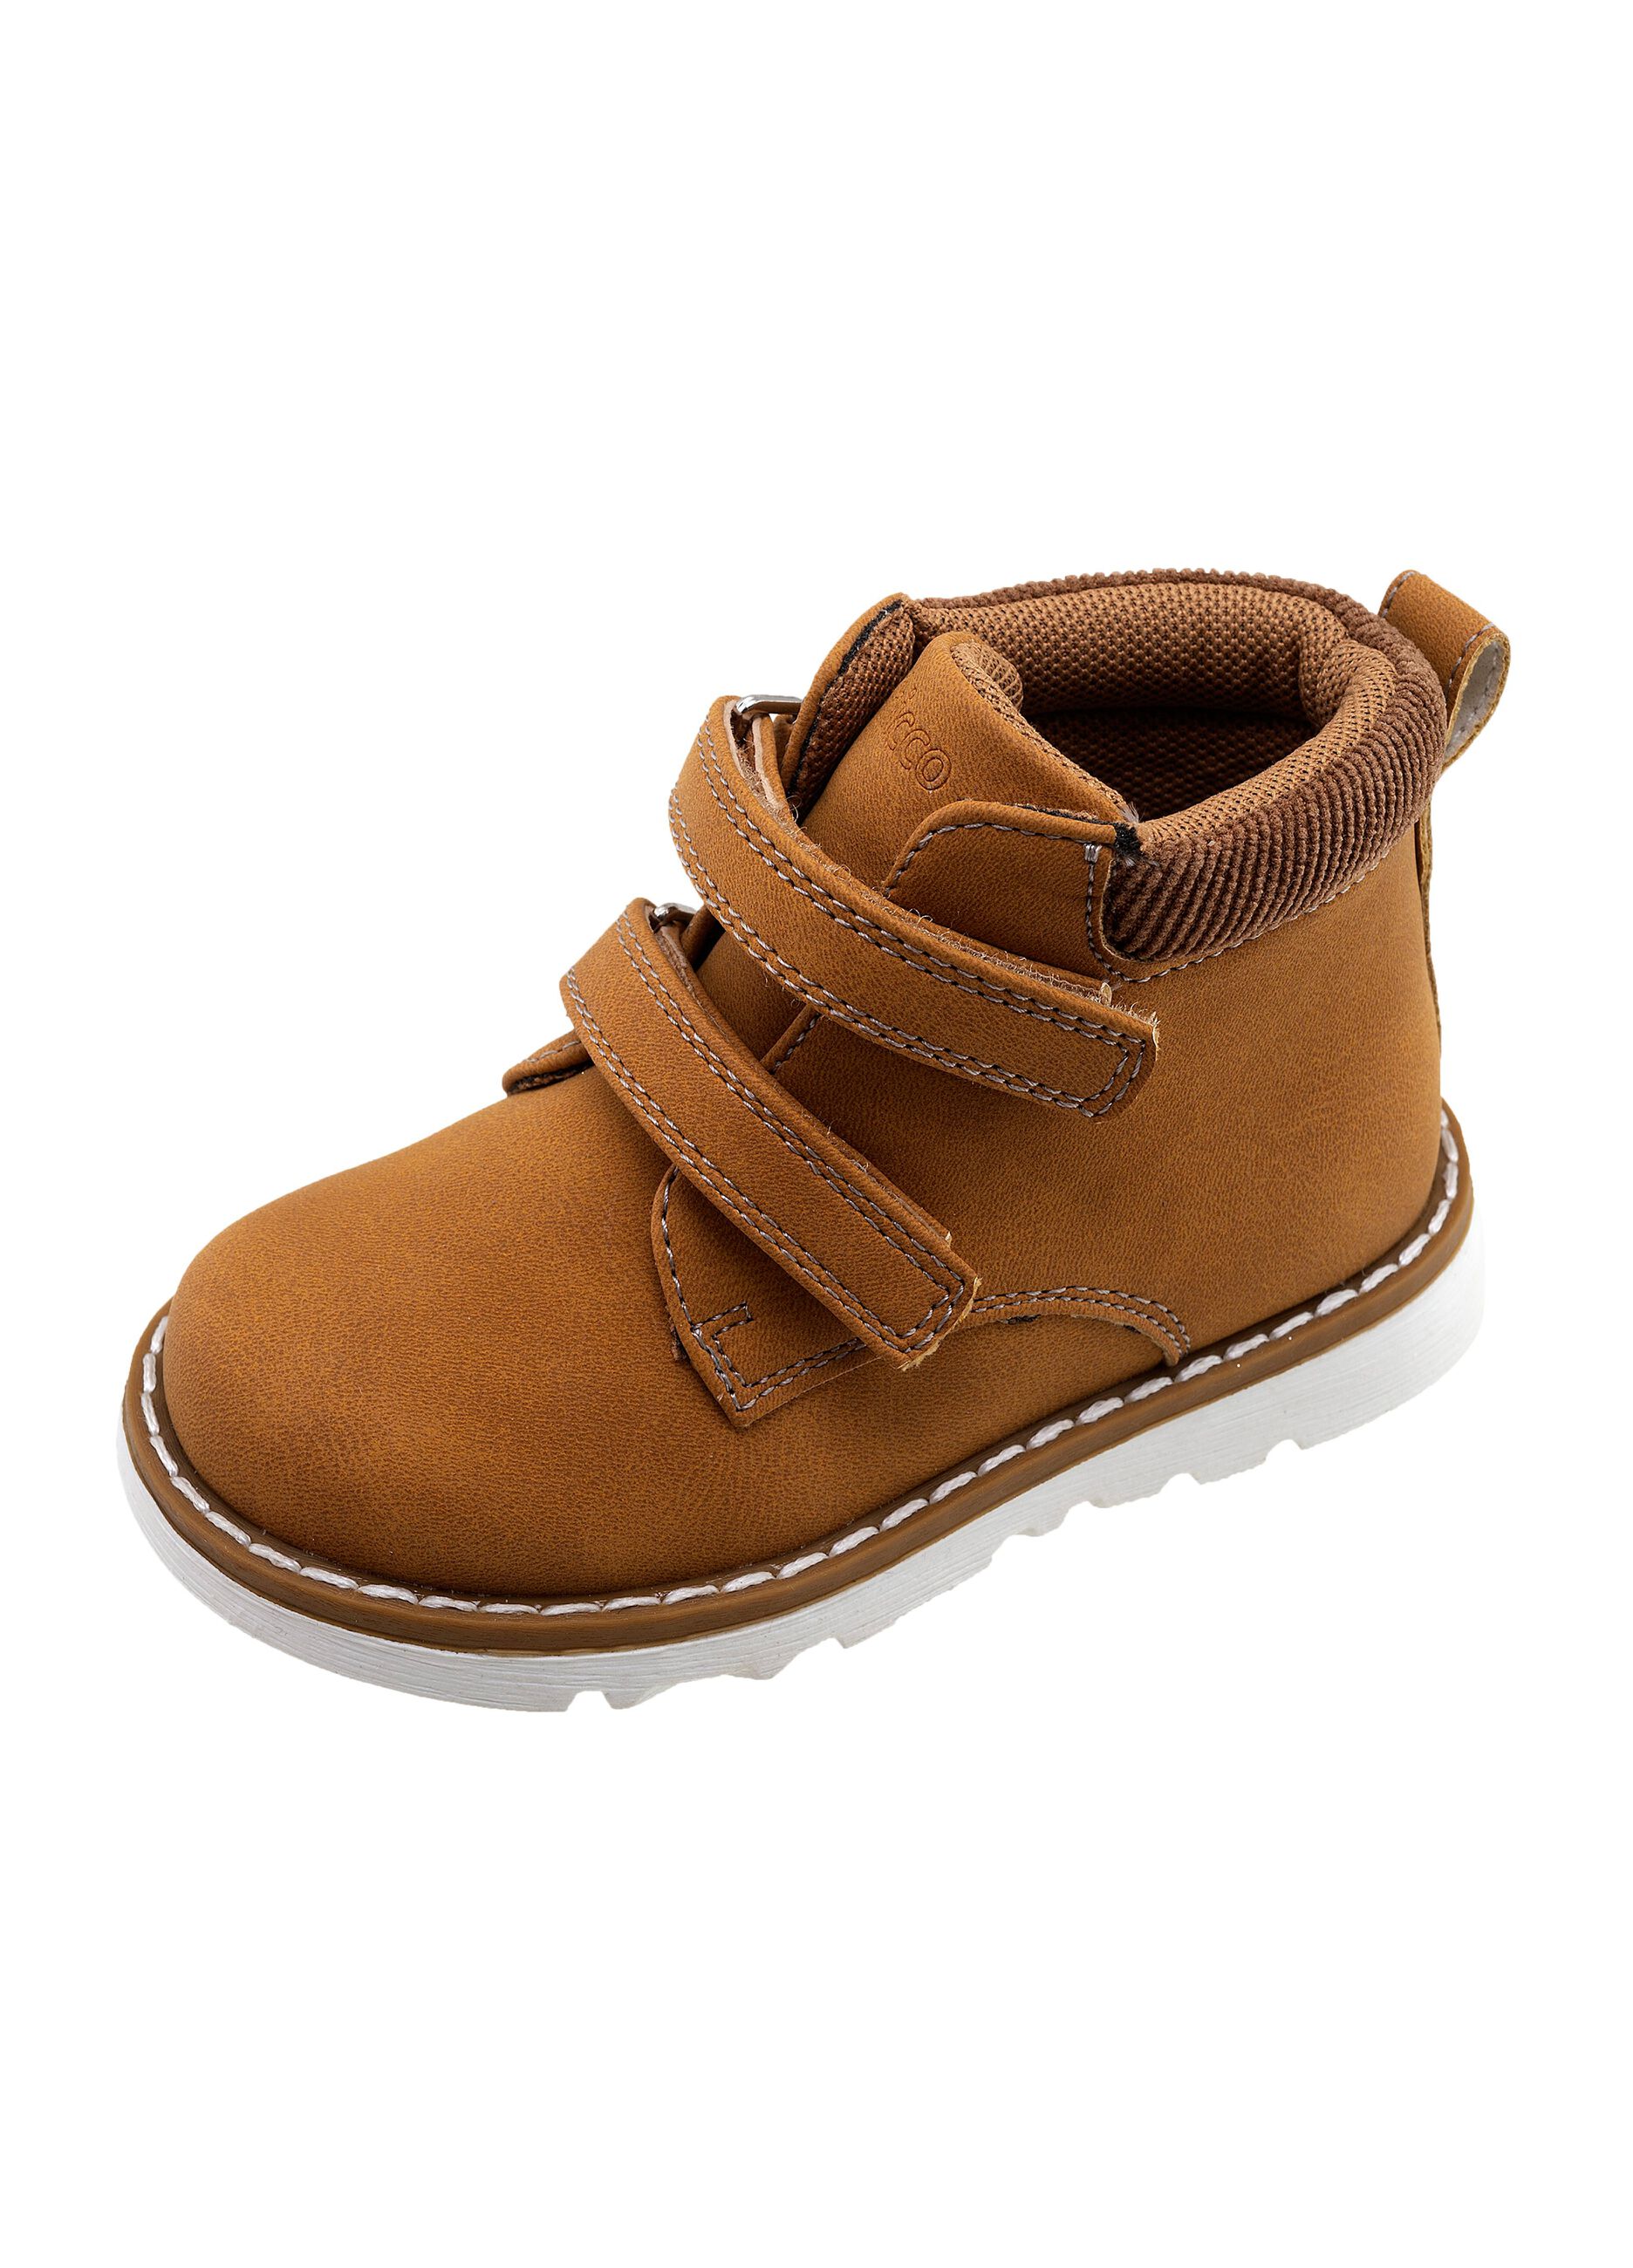 Chicco boys’ ankle boots